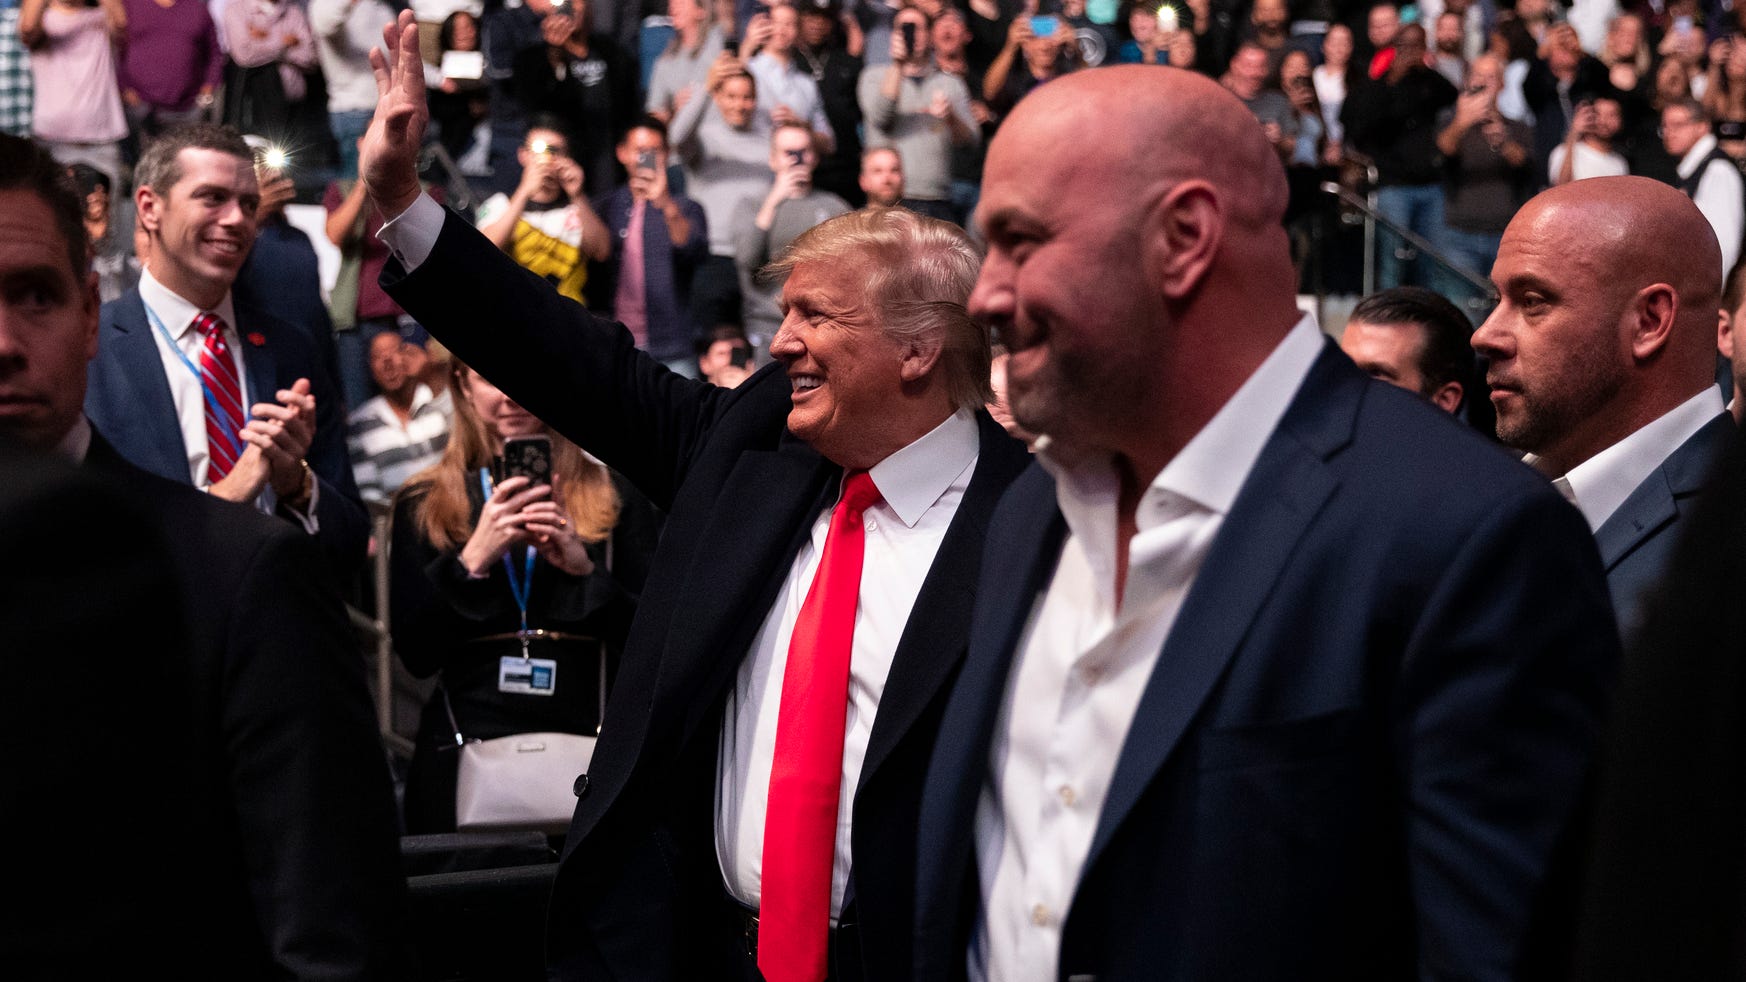 UFC 244: President Donald Trump met with protests mixed reaction